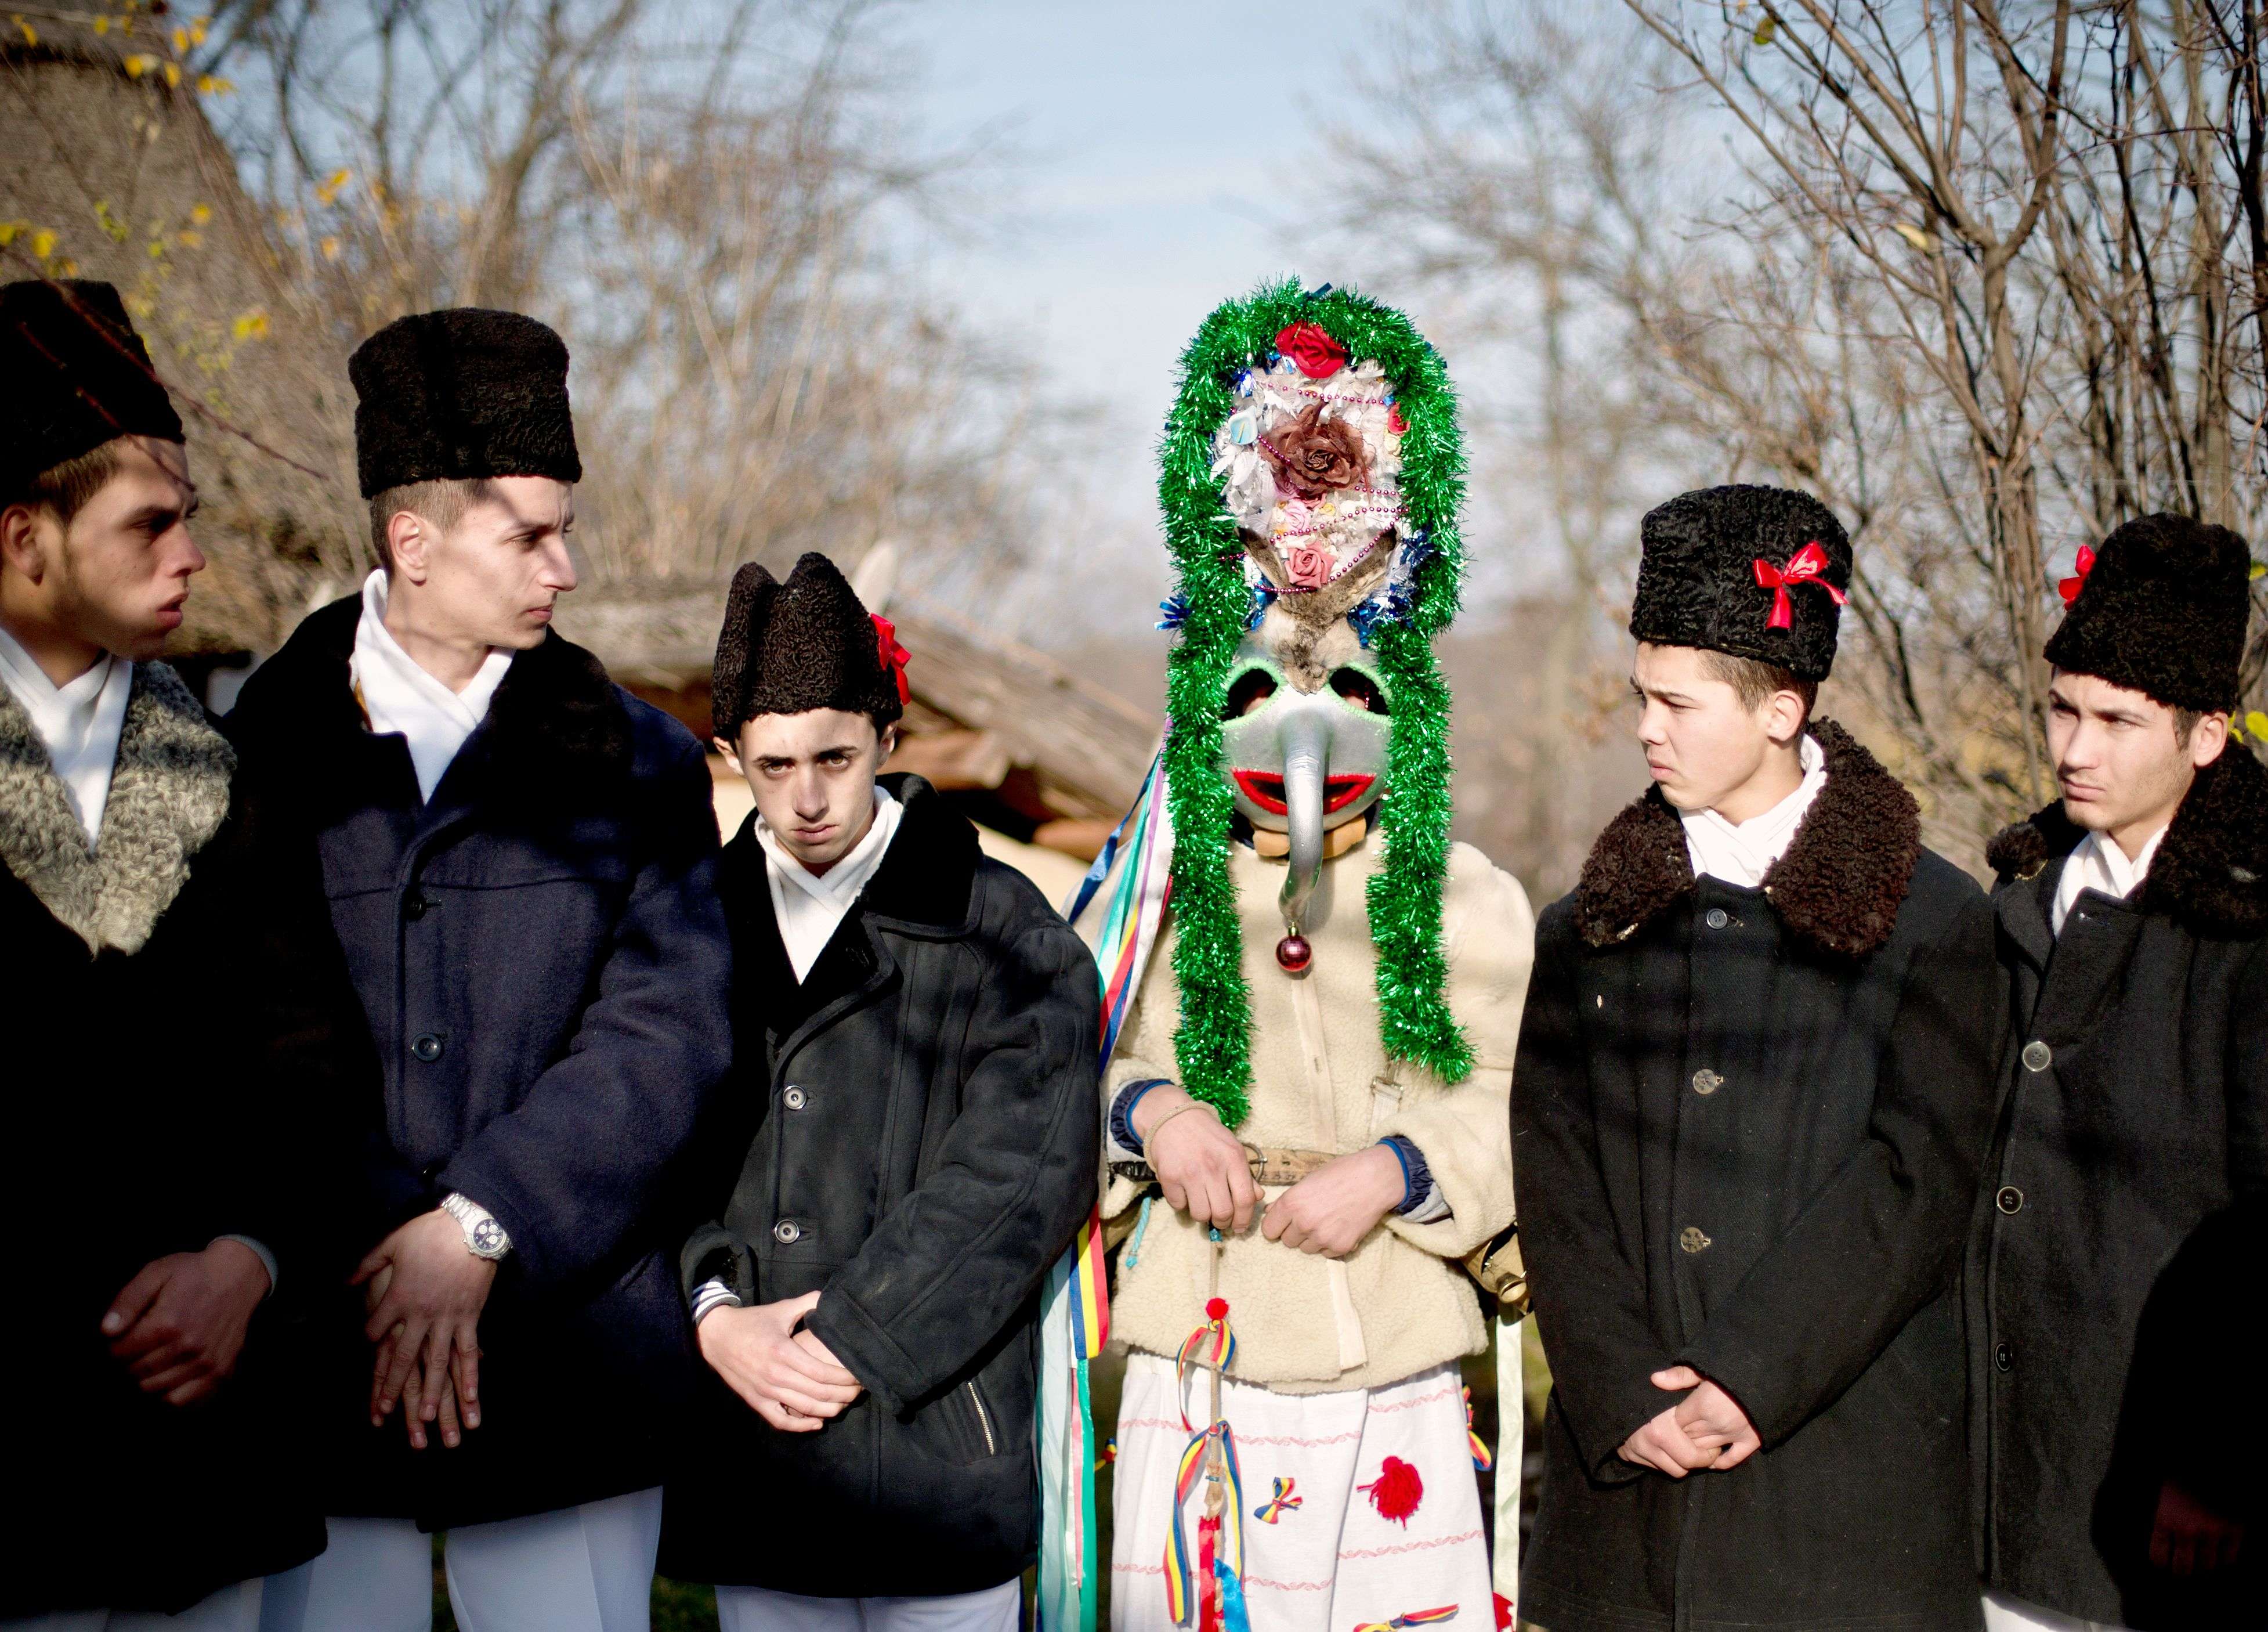 Men wearing traditional Romanian costumes, masks and animal furs prepare to perform in a show of winter traditions at the Village Museum in Bucharest, Romania, Sunday, Dec. 13, 2015. In pre-Christian rural traditions, dancers wearing colored costumes or animal furs toured from house to house in villages, singing and dancing to ward off evil. (AP Photo/Vadim Ghirda)